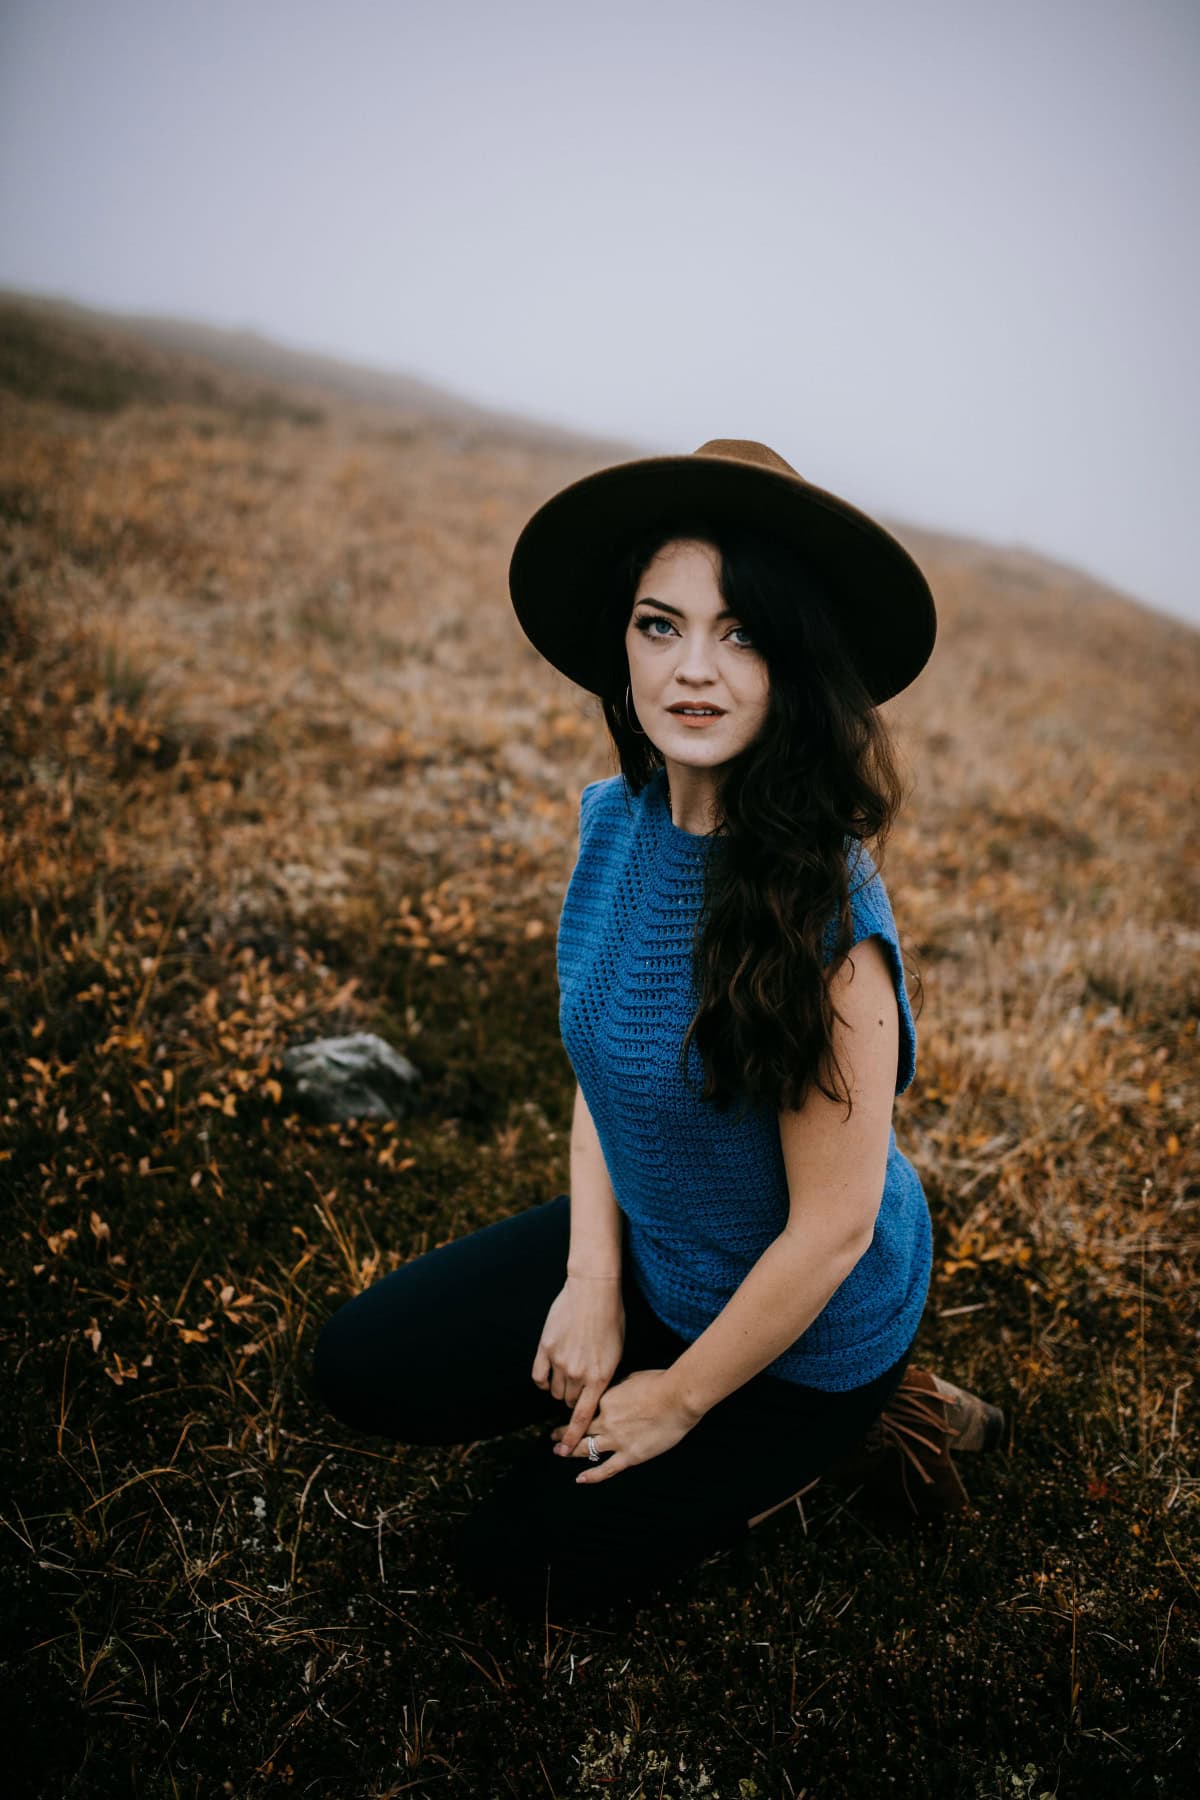 Young woman wearing a hat and teal summer crochet top and kneeling on a mountain.